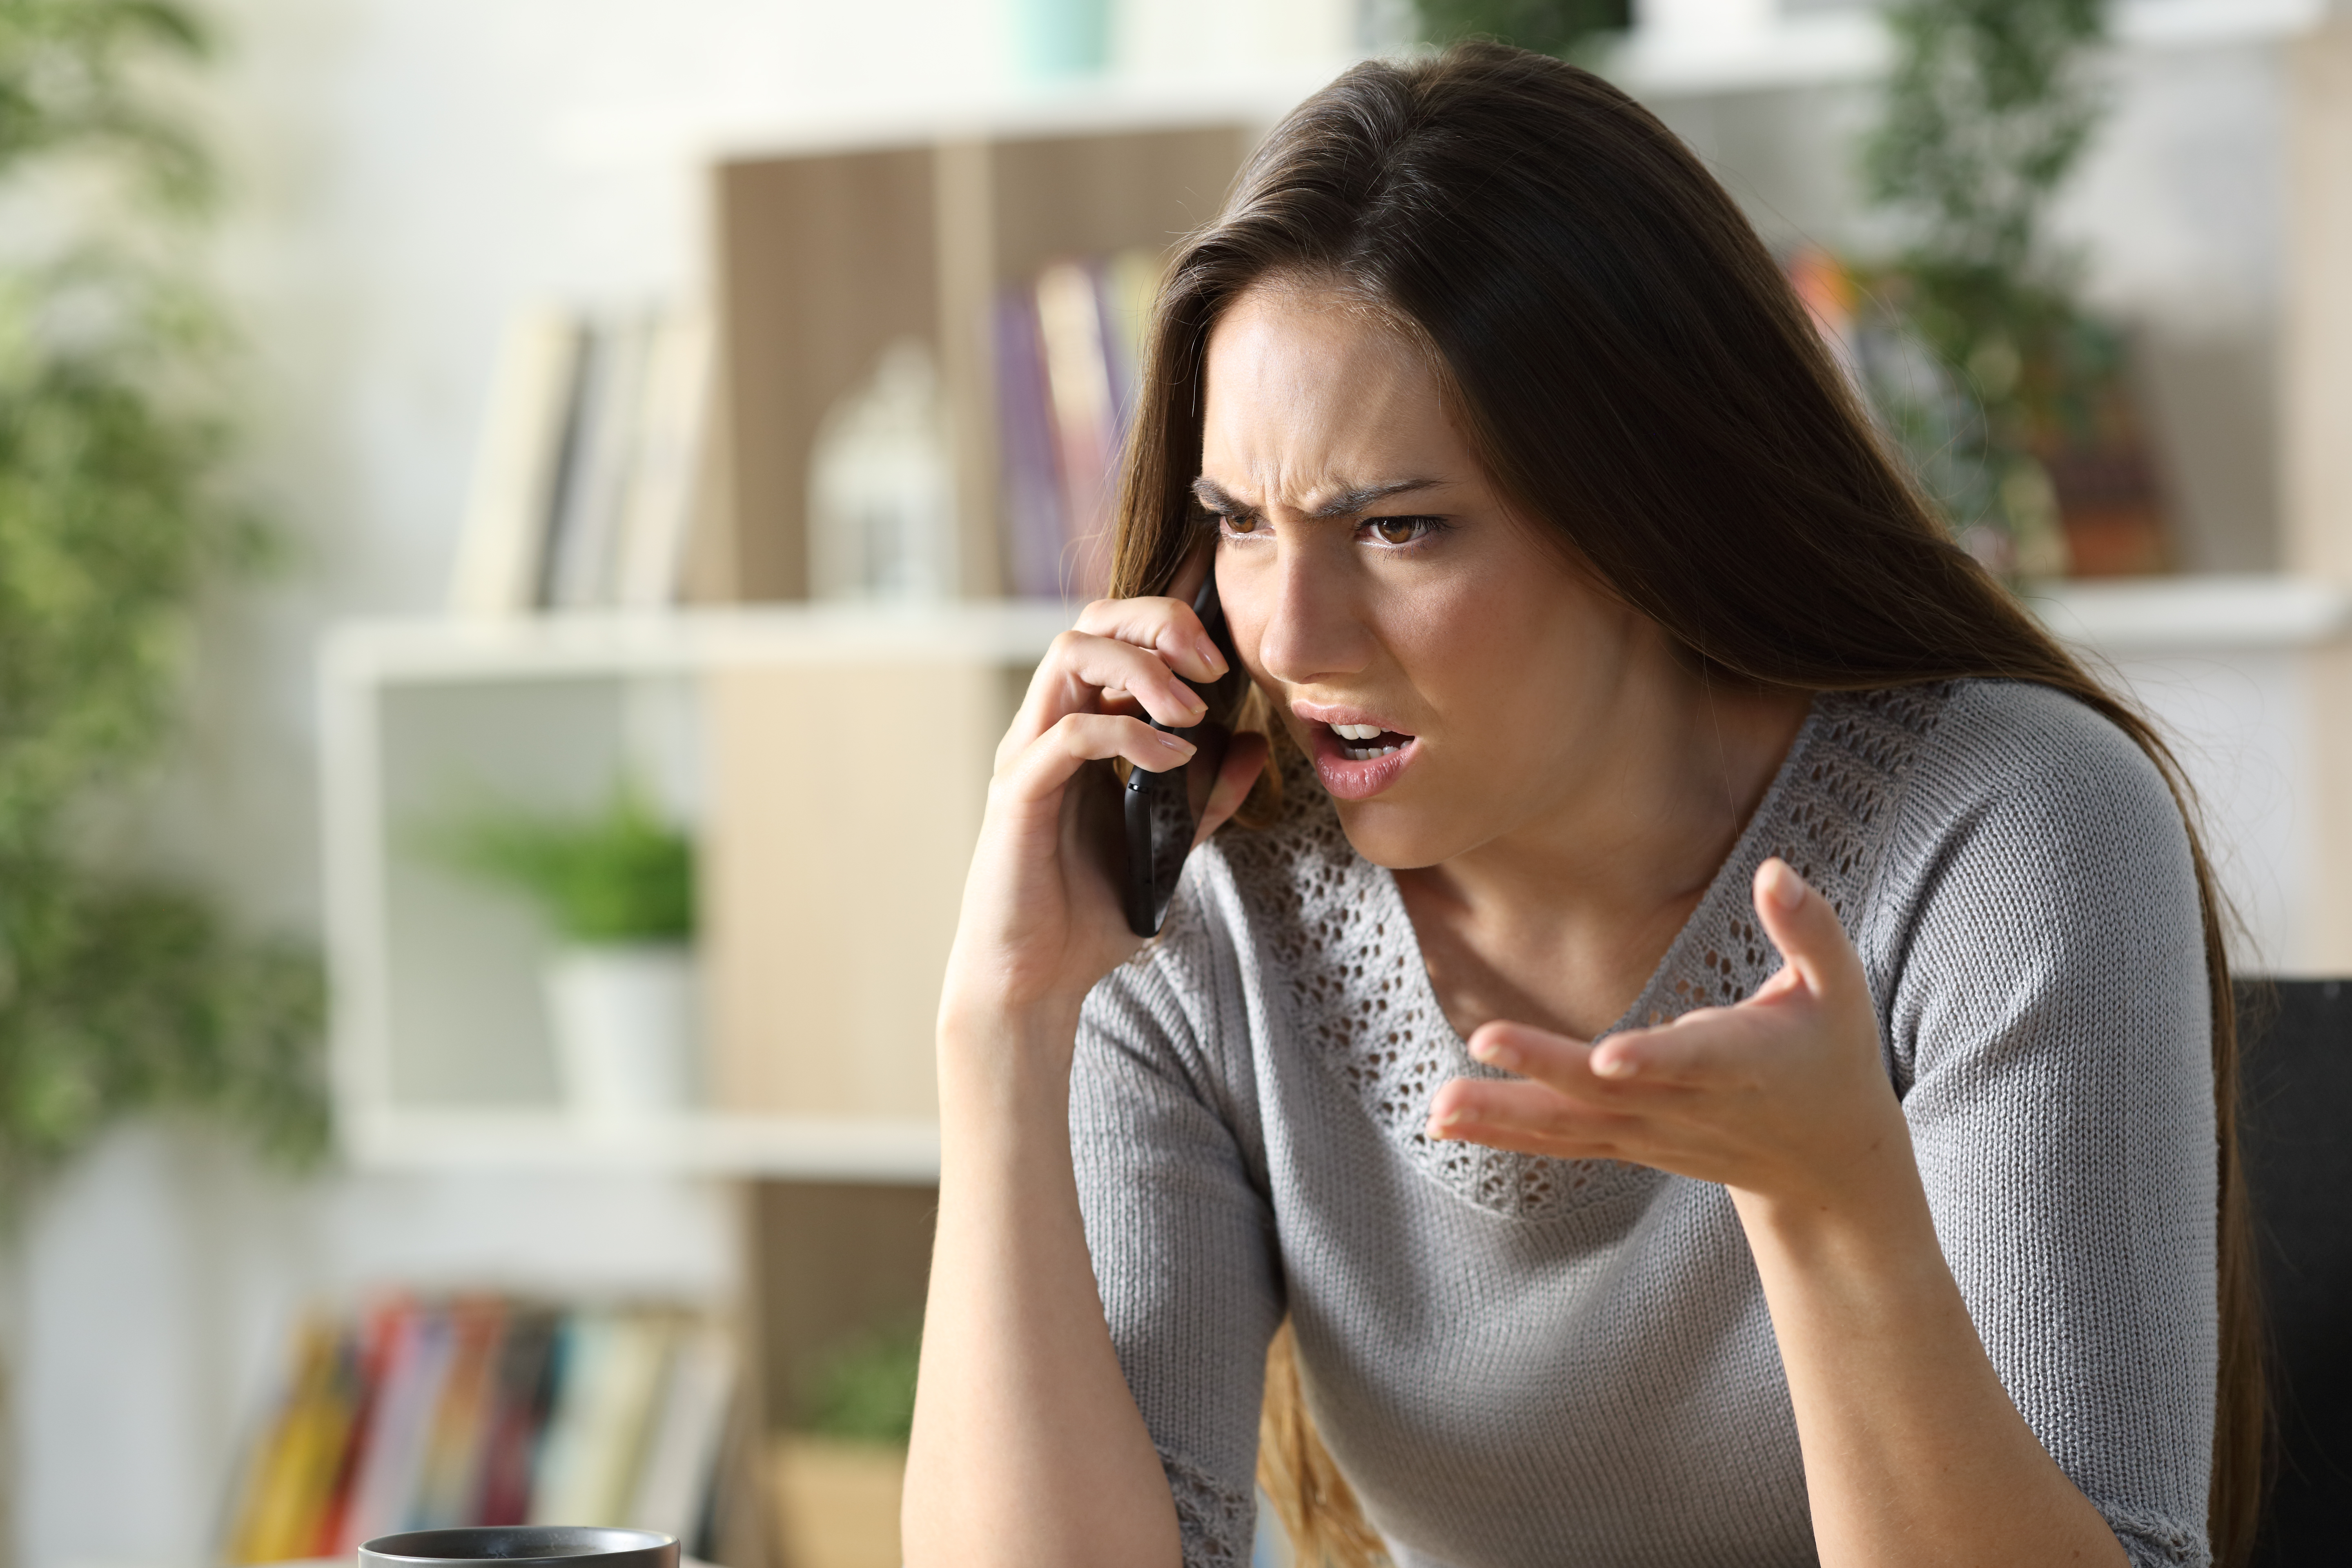 Woman arguing on the phone | Source: Getty Images